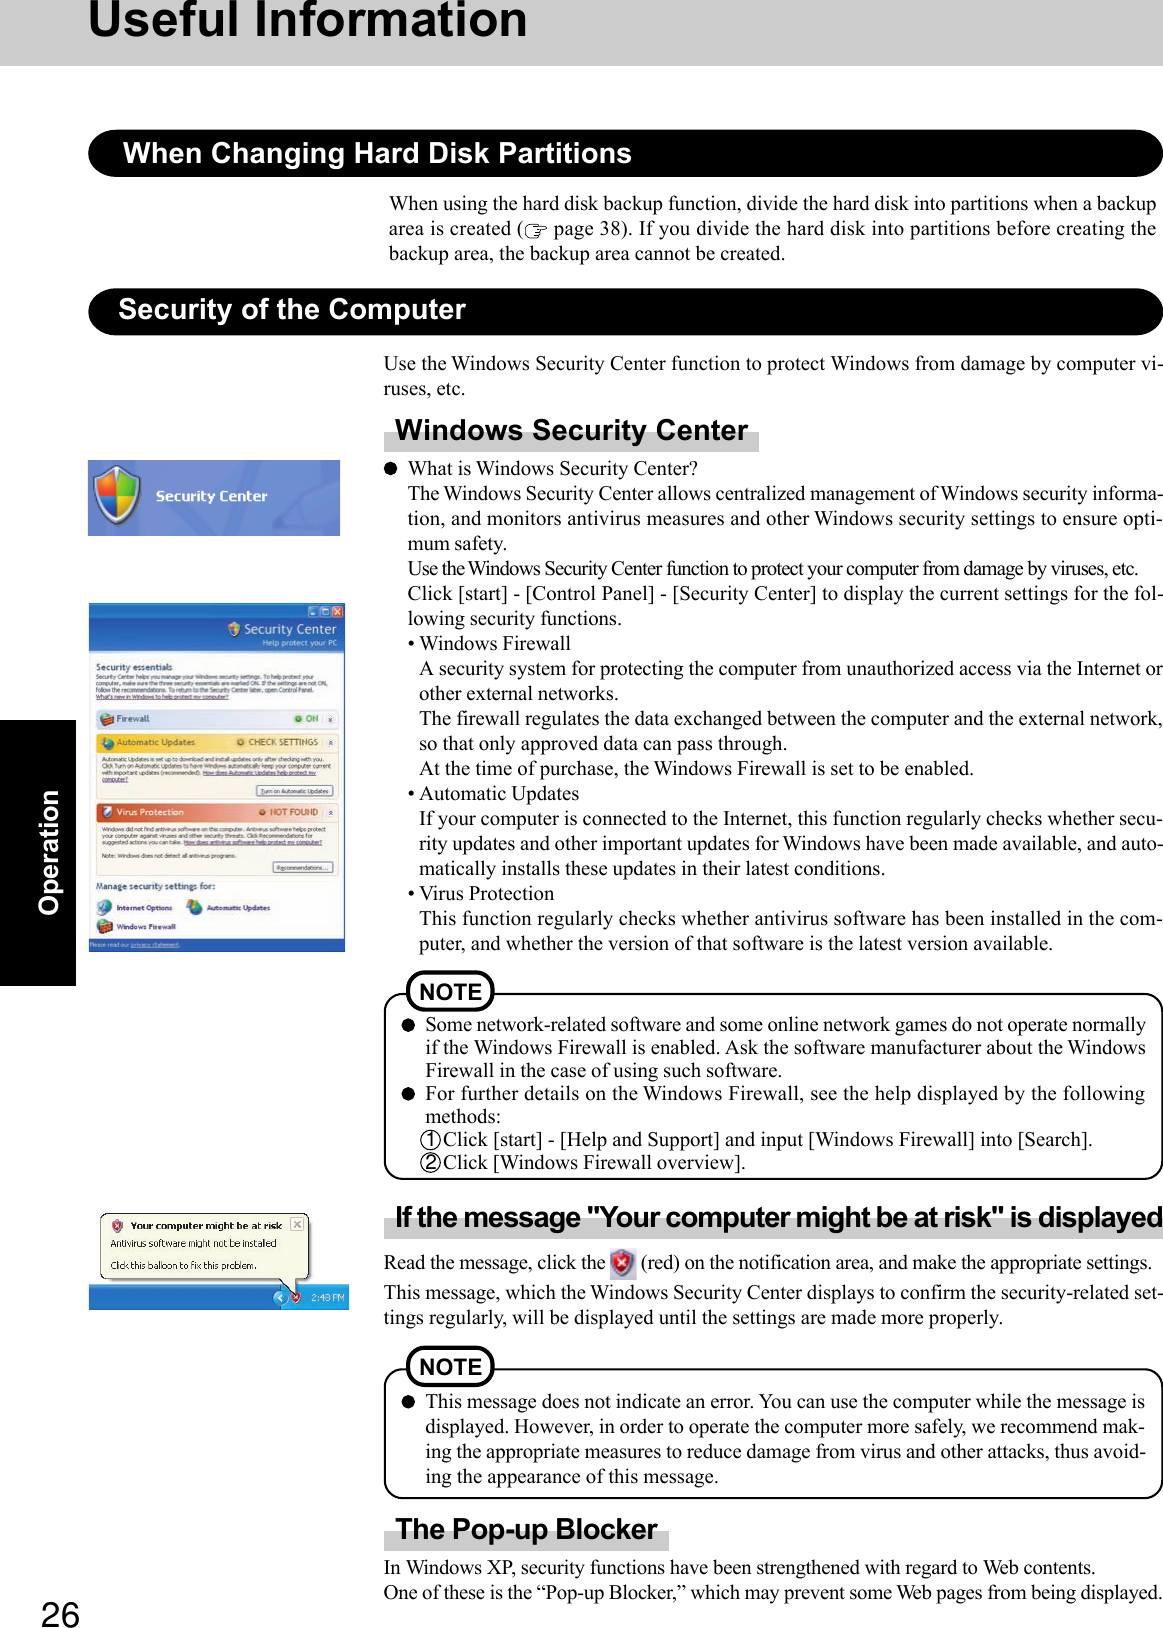 26OperationUseful InformationSome network-related software and some online network games do not operate normallyif the Windows Firewall is enabled. Ask the software manufacturer about the WindowsFirewall in the case of using such software.For further details on the Windows Firewall, see the help displayed by the followingmethods:1Click [start] - [Help and Support] and input [Windows Firewall] into [Search].2Click [Windows Firewall overview].NOTESecurity of the ComputerWindows Security CenterWhat is Windows Security Center?The Windows Security Center allows centralized management of Windows security informa-tion, and monitors antivirus measures and other Windows security settings to ensure opti-mum safety.Use the Windows Security Center function to protect your computer from damage by viruses, etc.Click [start] - [Control Panel] - [Security Center] to display the current settings for the fol-lowing security functions.• Windows FirewallA security system for protecting the computer from unauthorized access via the Internet orother external networks.The firewall regulates the data exchanged between the computer and the external network,so that only approved data can pass through.At the time of purchase, the Windows Firewall is set to be enabled.• Automatic UpdatesIf your computer is connected to the Internet, this function regularly checks whether secu-rity updates and other important updates for Windows have been made available, and auto-matically installs these updates in their latest conditions.• Virus ProtectionThis function regularly checks whether antivirus software has been installed in the com-puter, and whether the version of that software is the latest version available.Use the Windows Security Center function to protect Windows from damage by computer vi-ruses, etc.This message does not indicate an error. You can use the computer while the message isdisplayed. However, in order to operate the computer more safely, we recommend mak-ing the appropriate measures to reduce damage from virus and other attacks, thus avoid-ing the appearance of this message.NOTEIf the message &quot;Your computer might be at risk&quot; is displayedRead the message, click the   (red) on the notification area, and make the appropriate settings.This message, which the Windows Security Center displays to confirm the security-related set-tings regularly, will be displayed until the settings are made more properly.The Pop-up BlockerIn Windows XP, security functions have been strengthened with regard to Web contents.One of these is the “Pop-up Blocker,” which may prevent some Web pages from being displayed.When Changing Hard Disk PartitionsWhen using the hard disk backup function, divide the hard disk into partitions when a backuparea is created (  page 38). If you divide the hard disk into partitions before creating thebackup area, the backup area cannot be created.